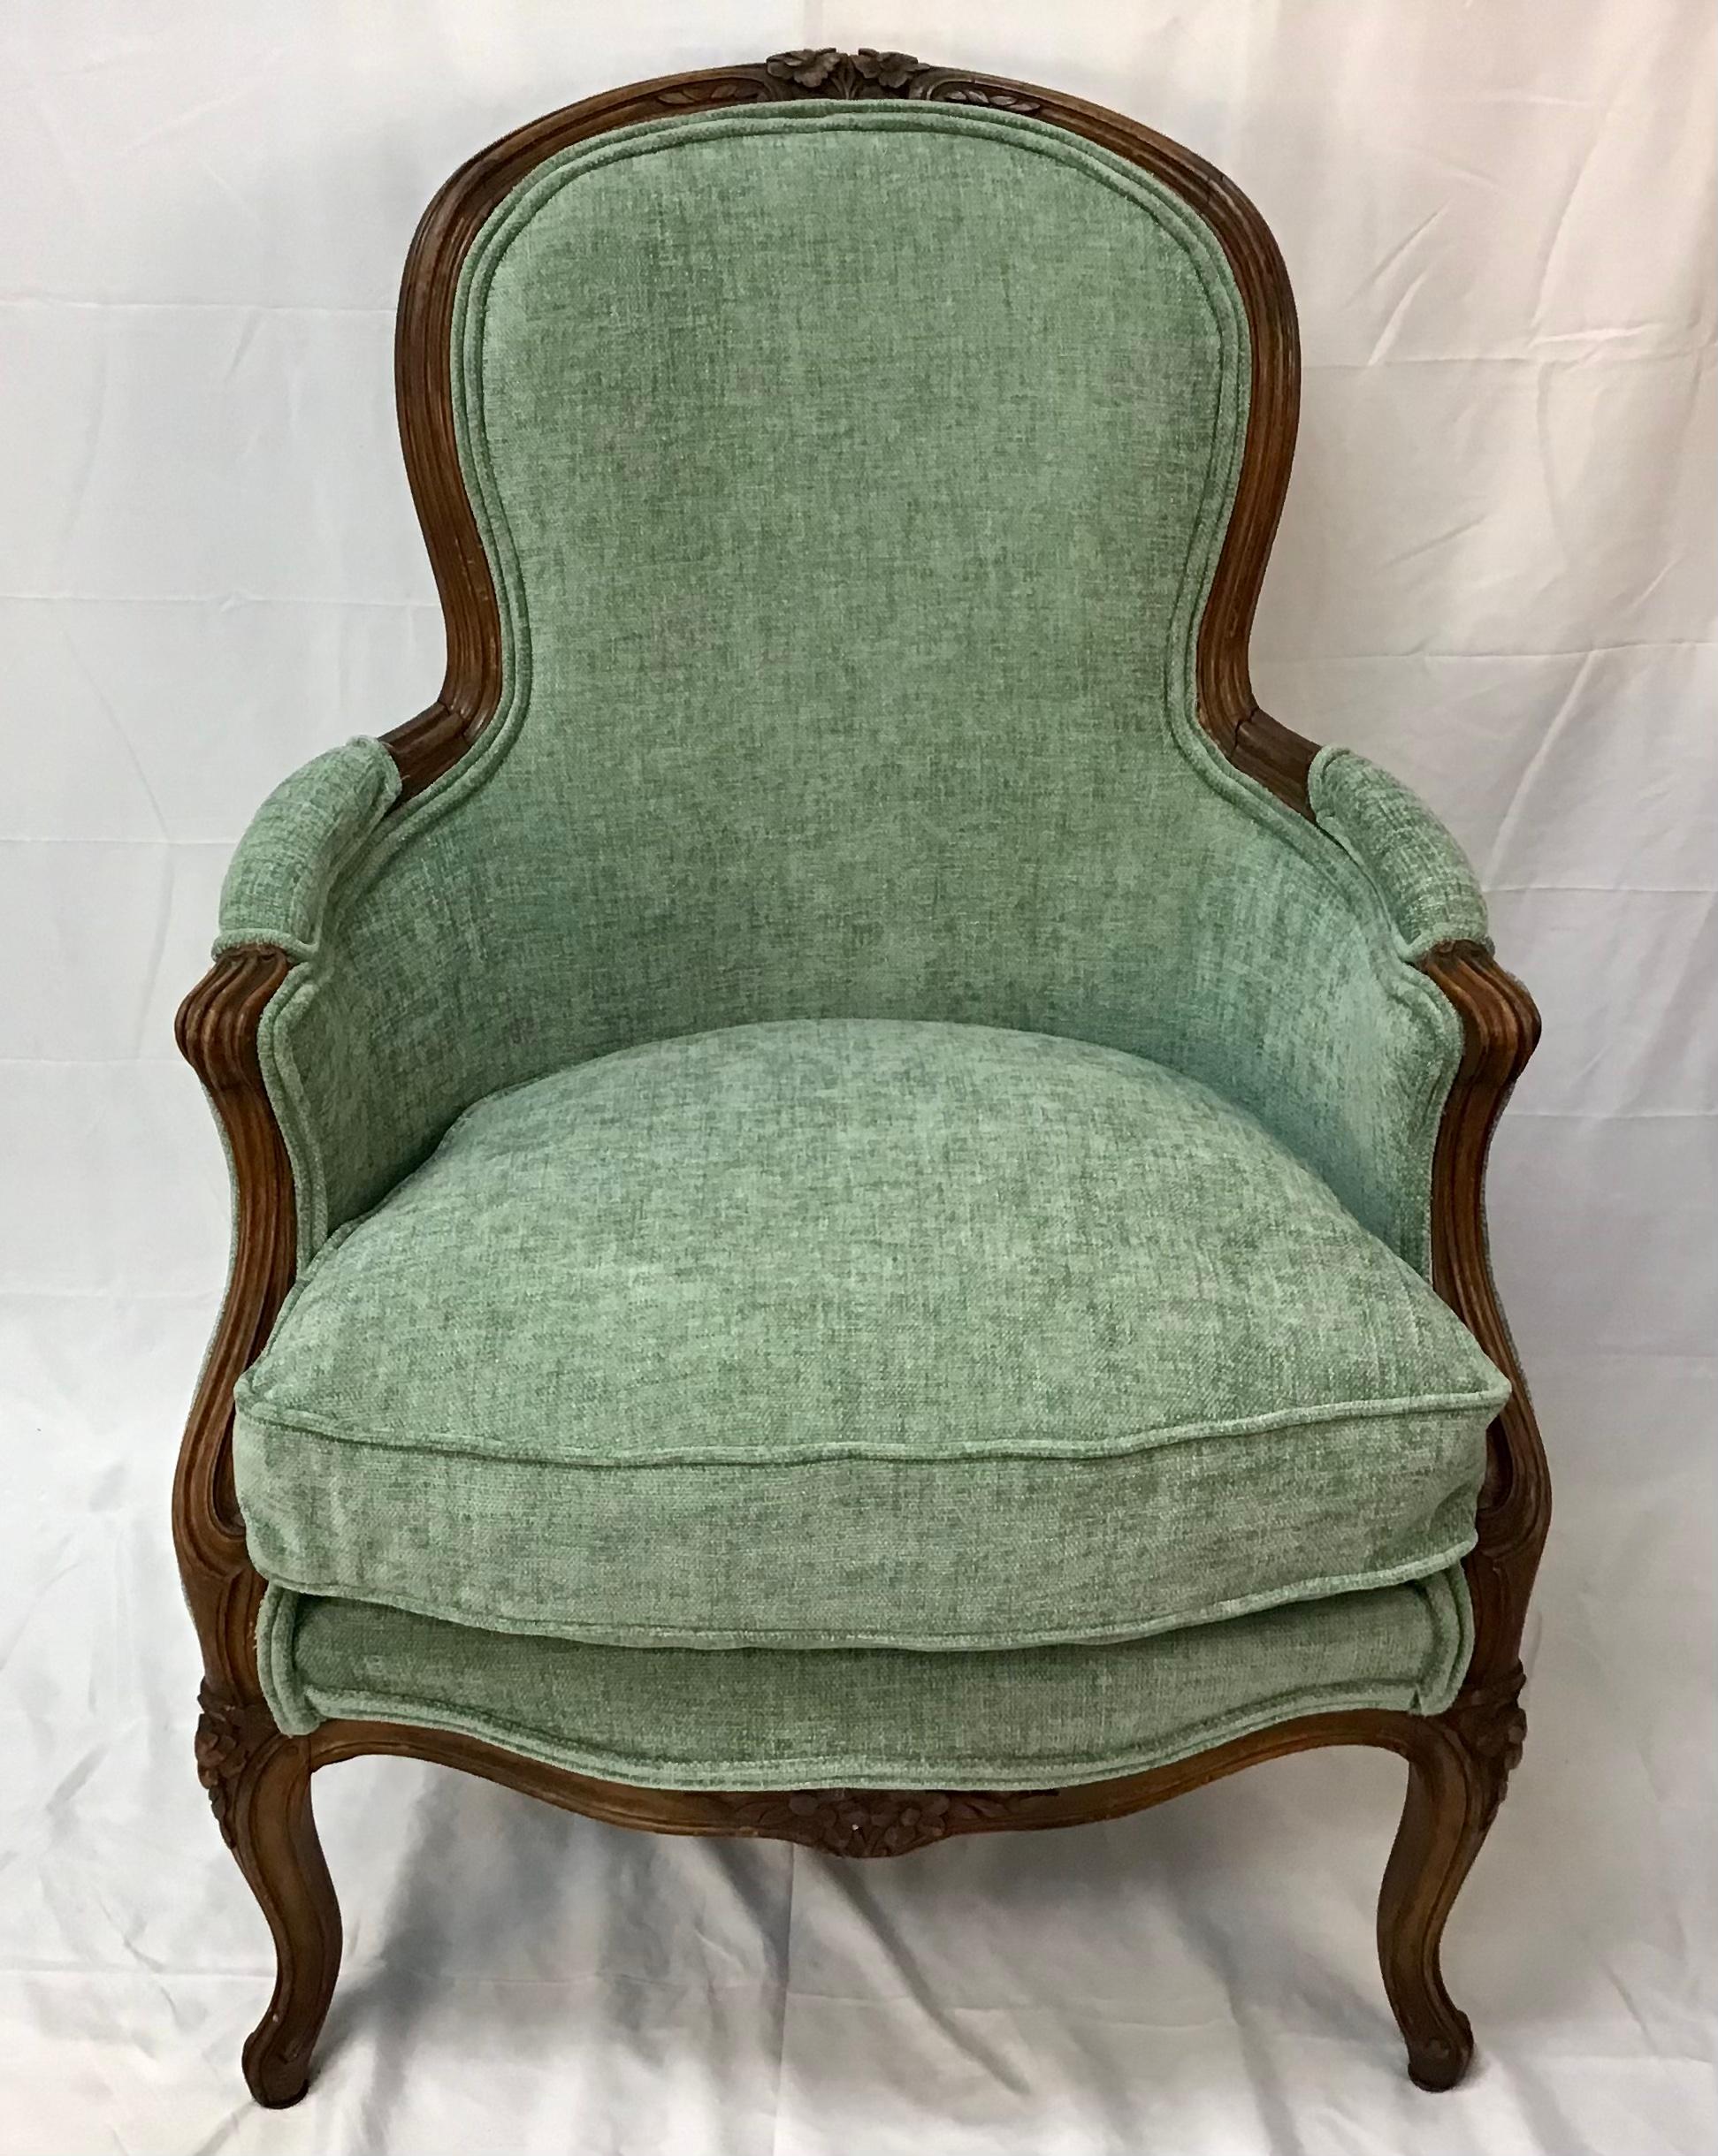 This French bergere has the typical carved details of Louis XV period. This chair is finely hand carved in walnut with flowers and intricate mouldings. The bergere has an arched, padded back and loose cushioned seat and rests on elegant cabriolet